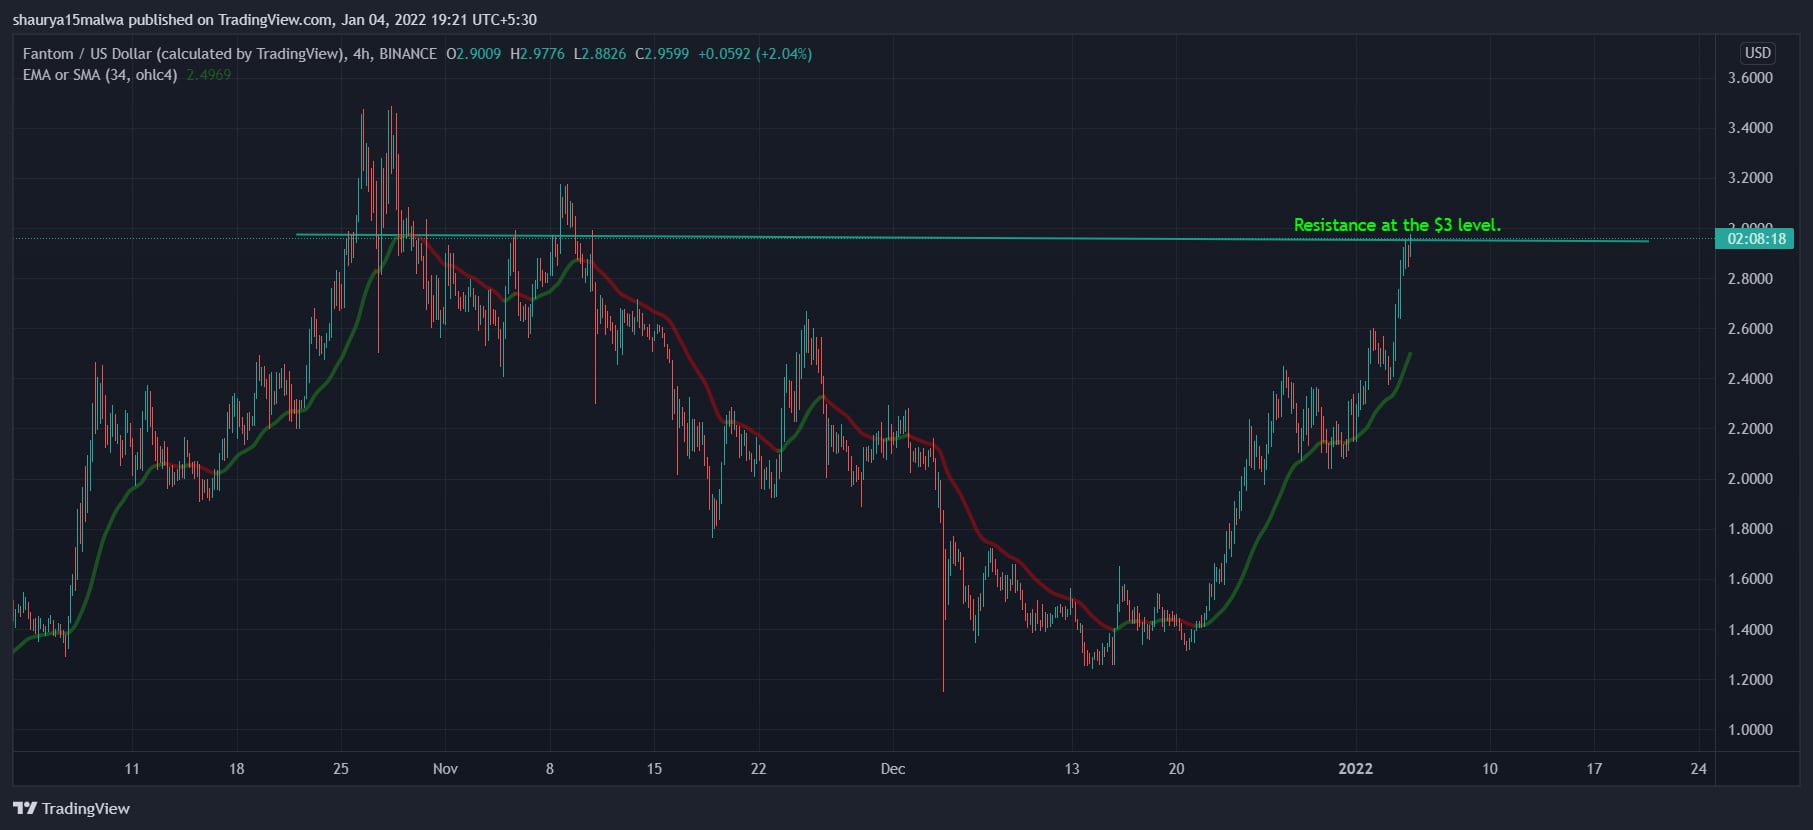 Fantom faces resistance at the $3 level. (TradingView)